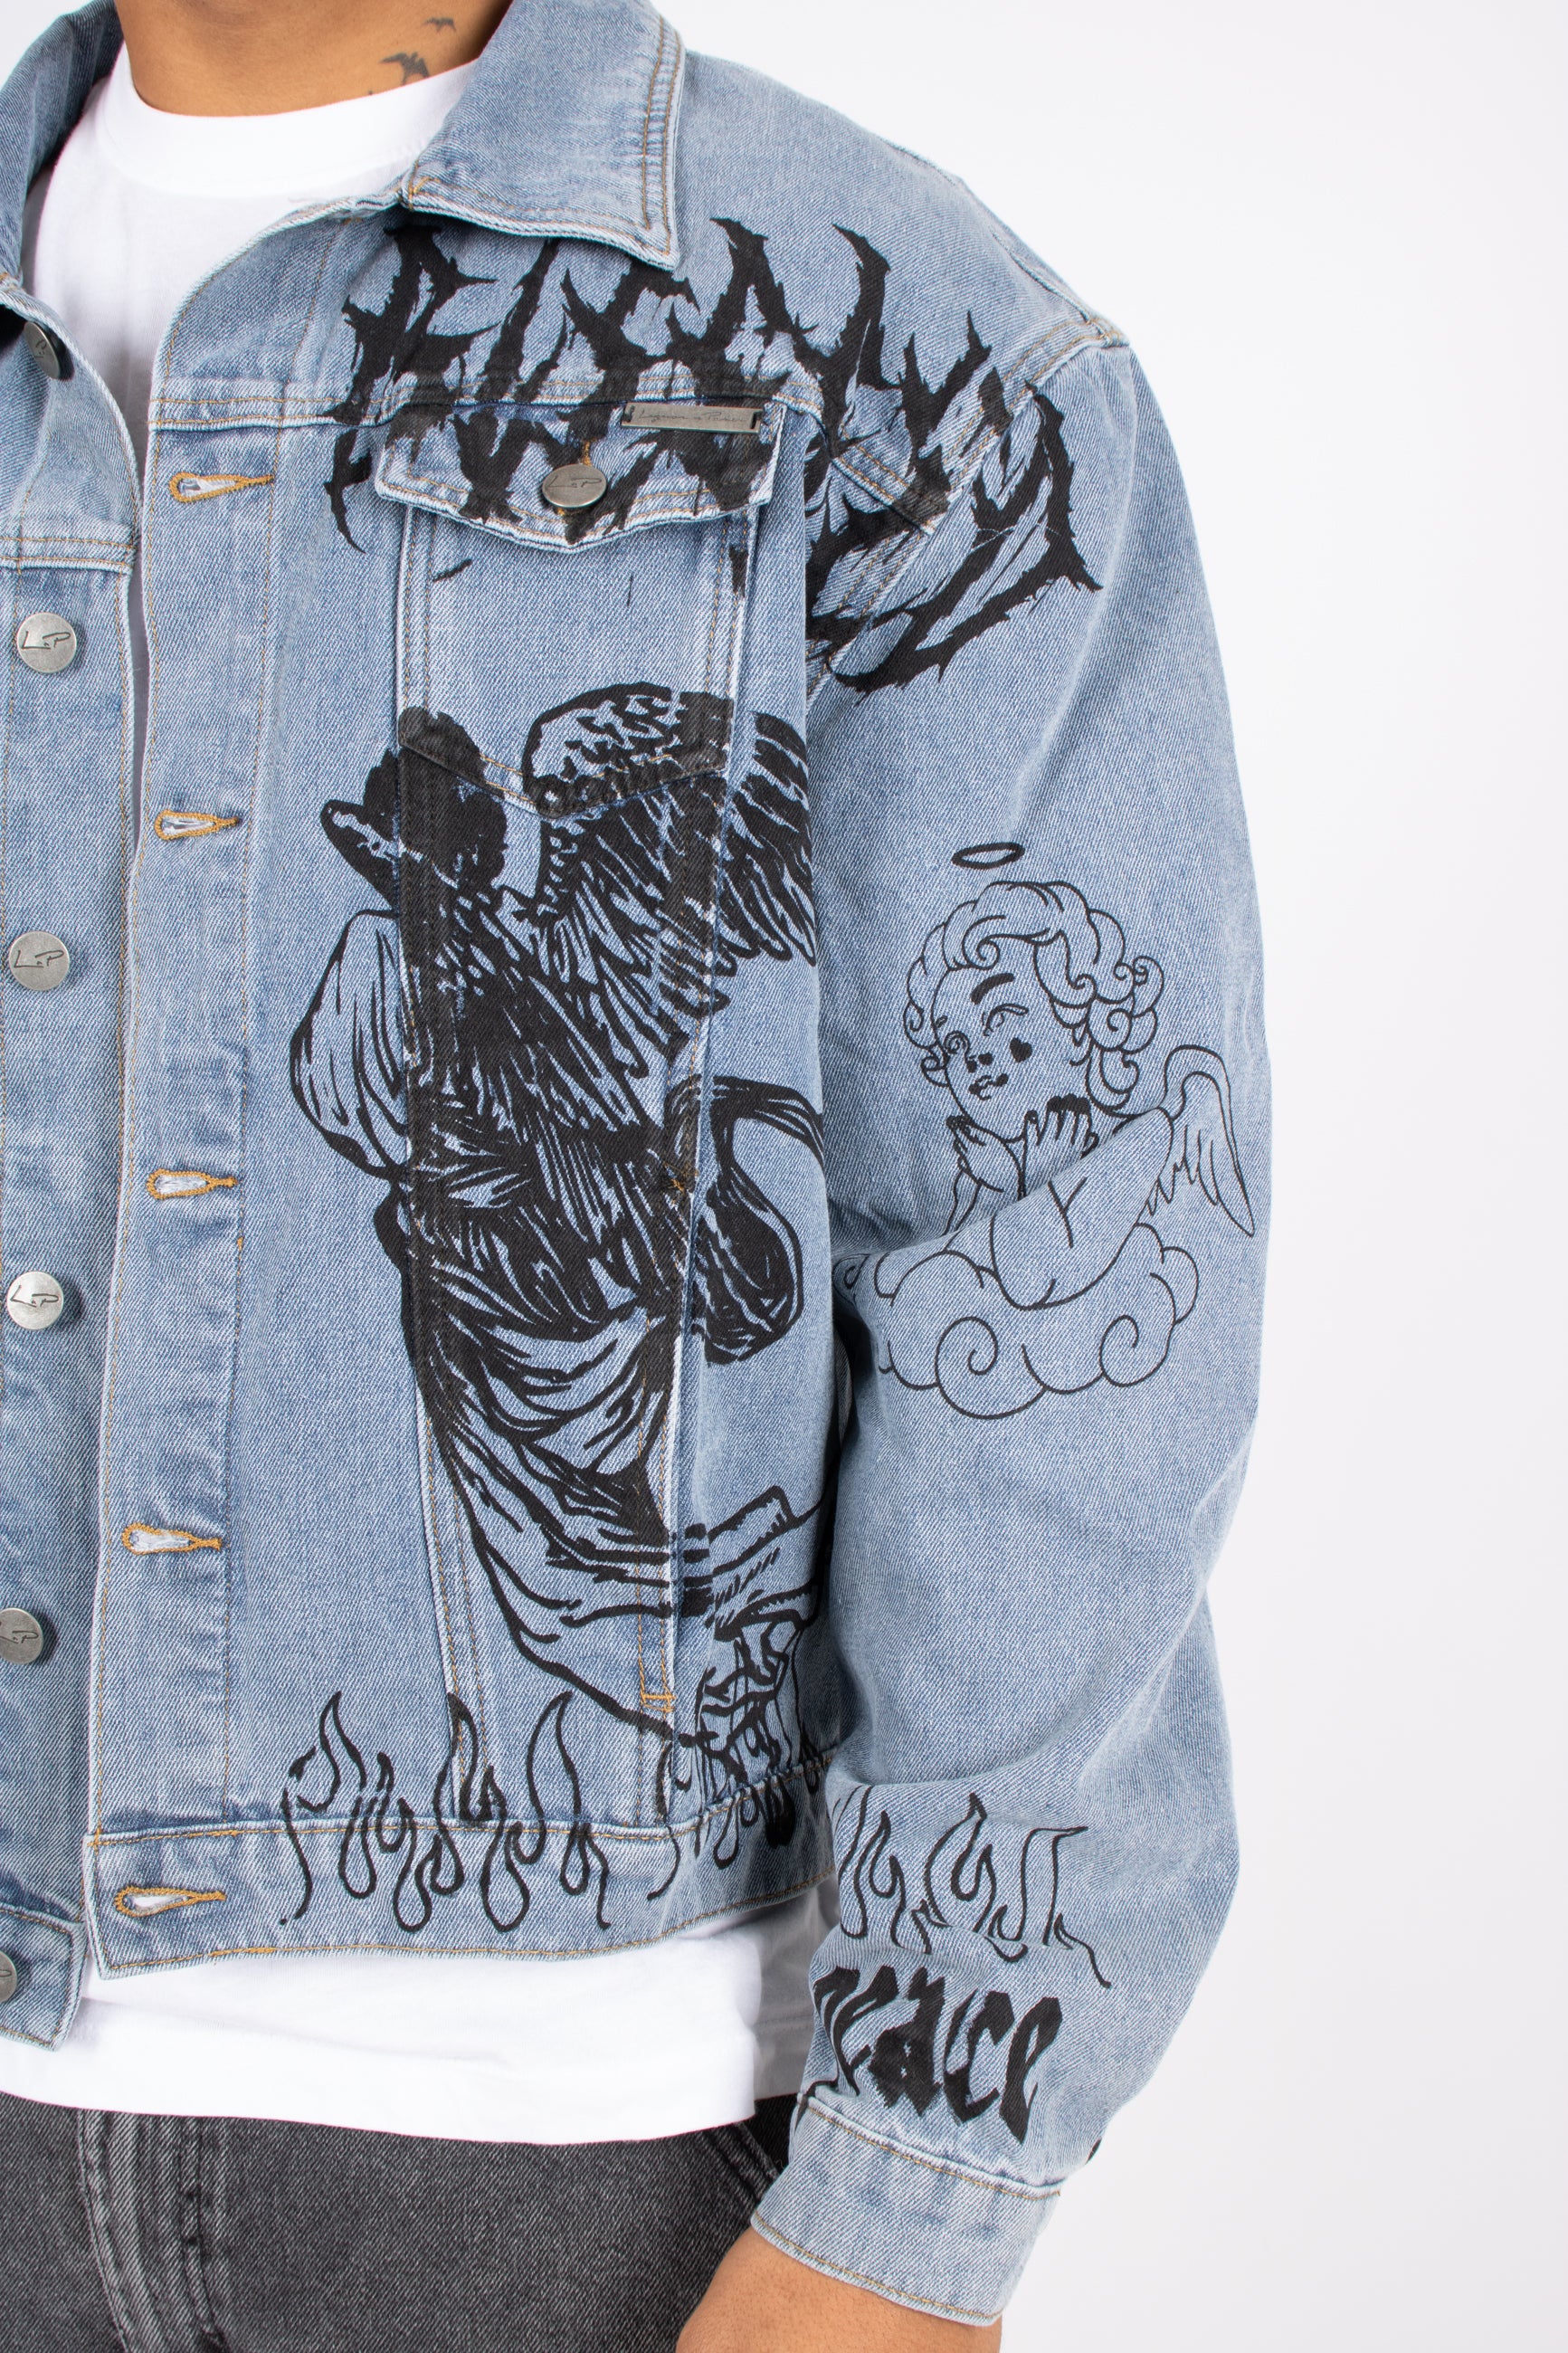 only-the-blessed-printed-denim-jacket